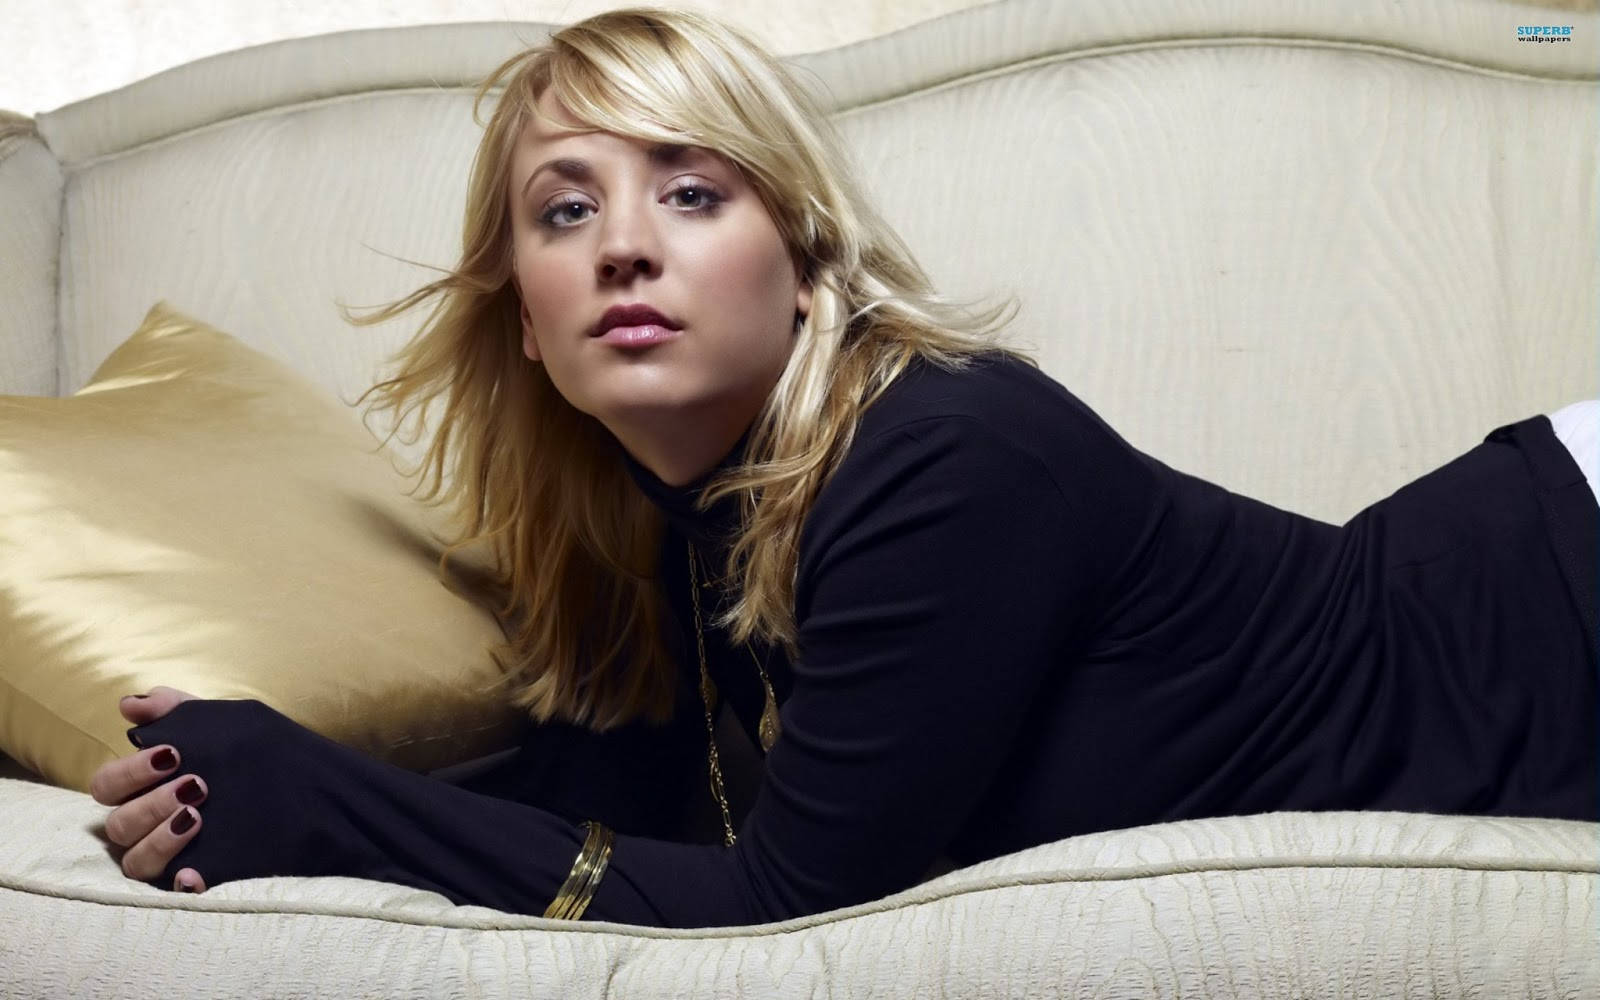 Blonde Kaley Cuoco On Couch Background